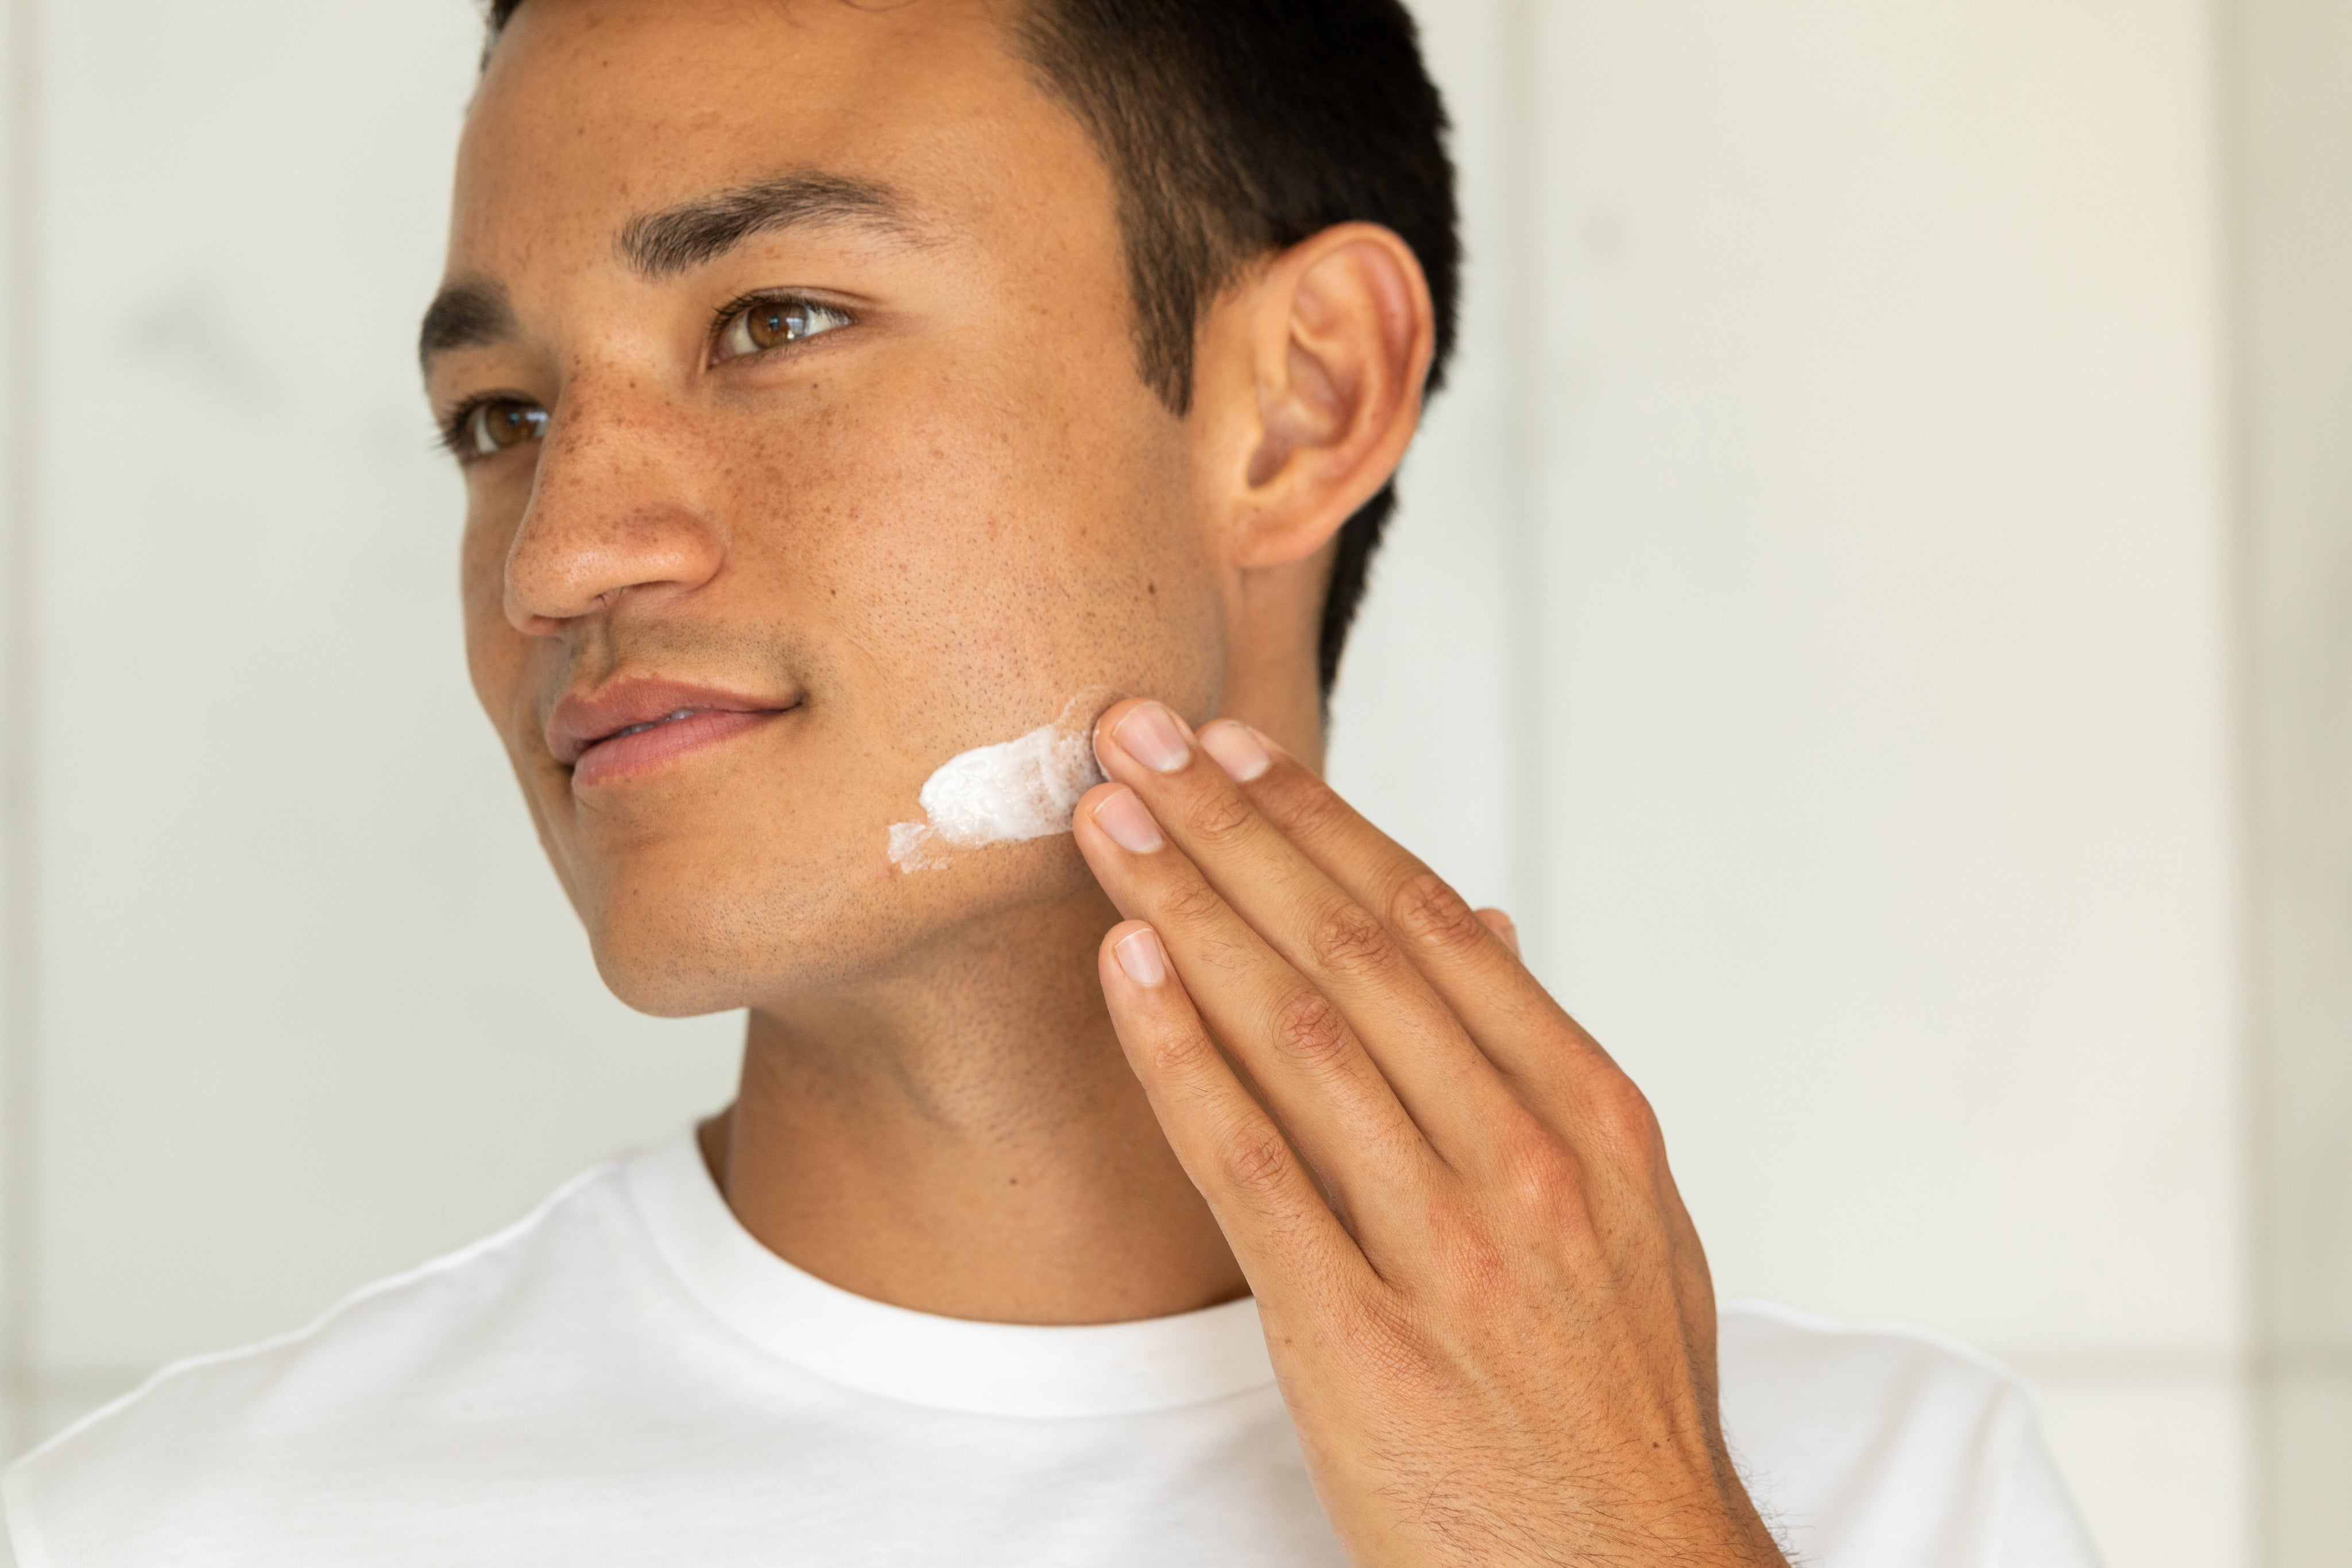 A man applying moisturizer to his face